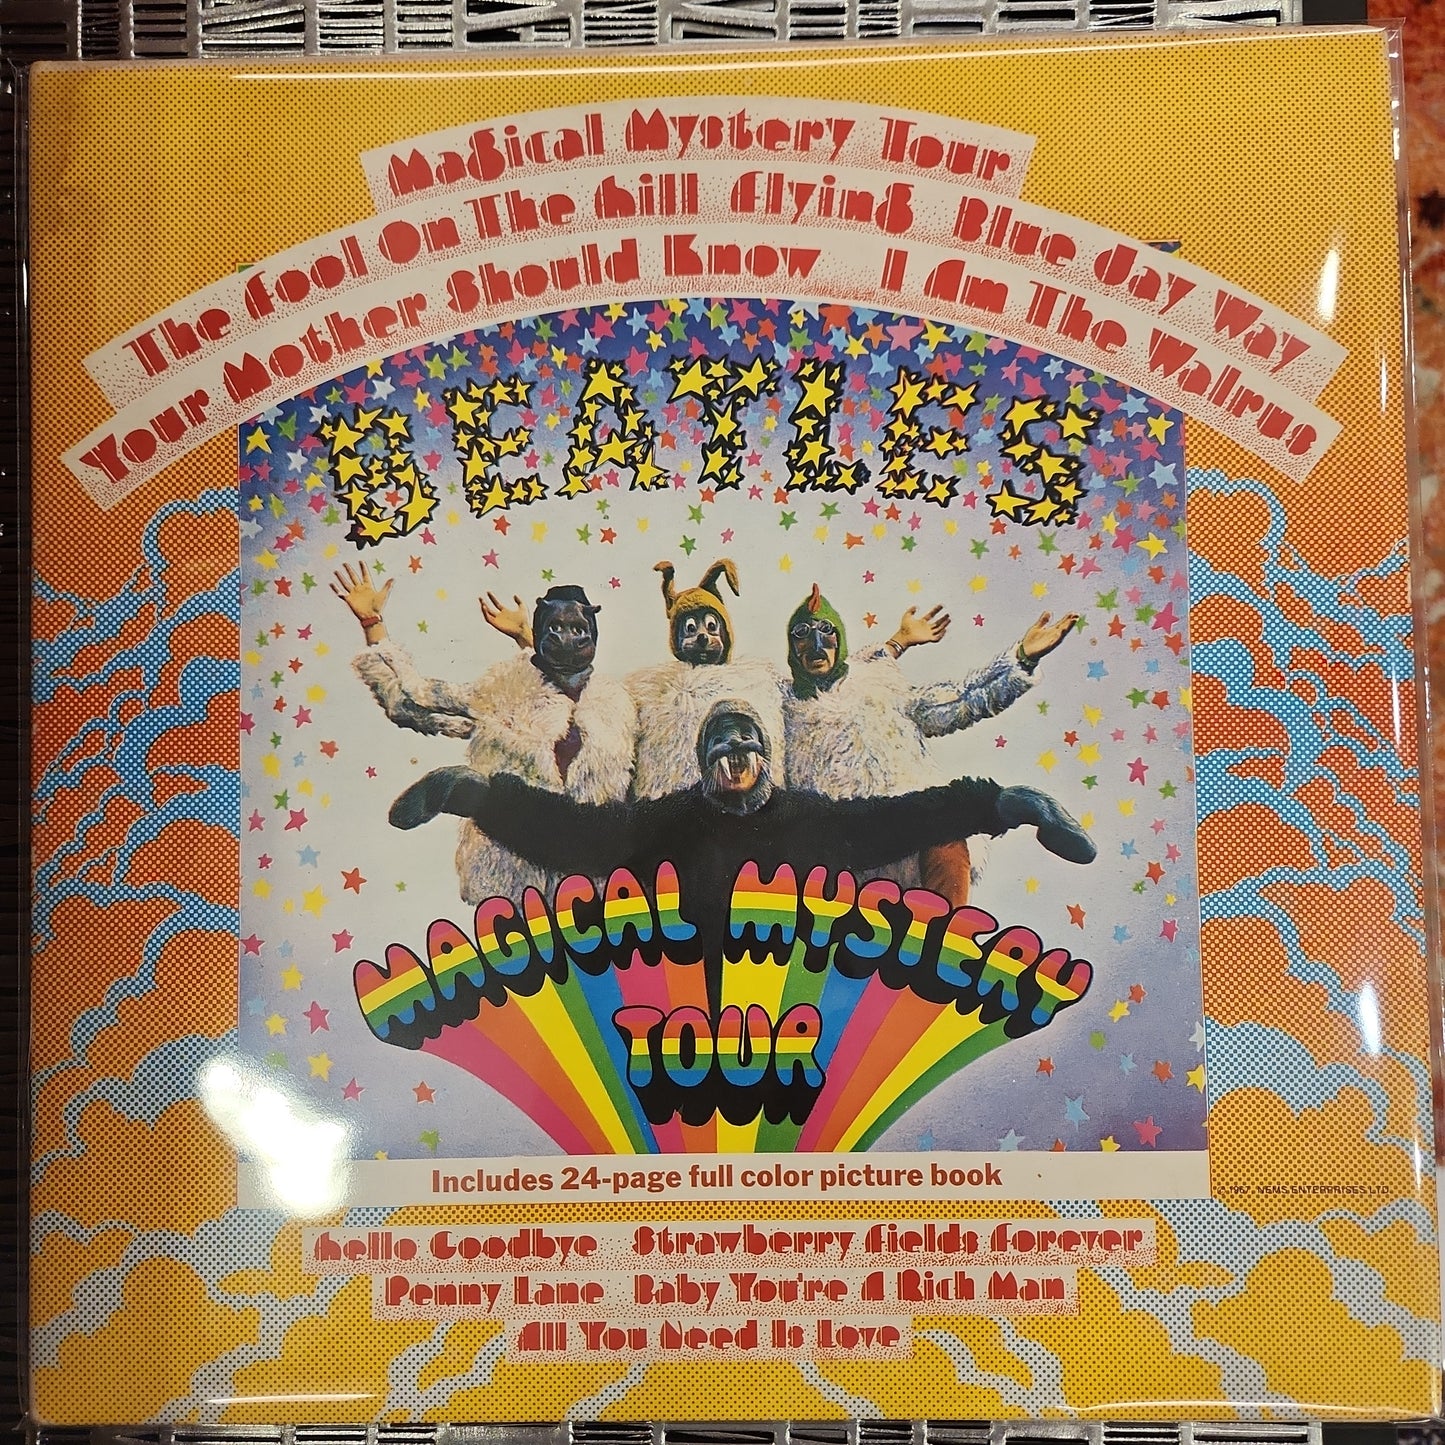 The Beatles - Magical Mystery Tour  (D)